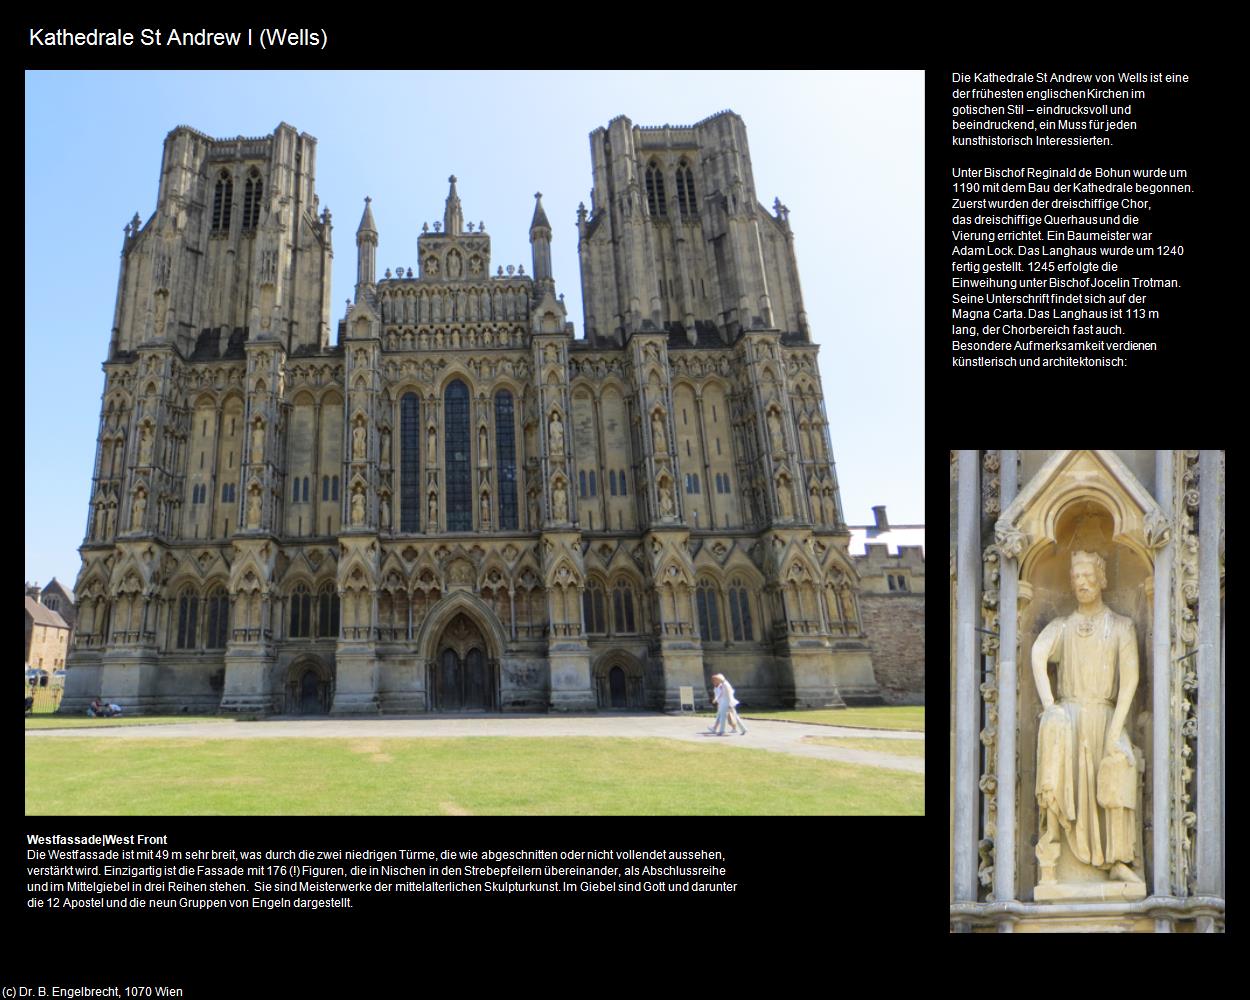 Kathedrale St Andrew I  (Wells, England) in Kulturatlas-ENGLAND und WALES